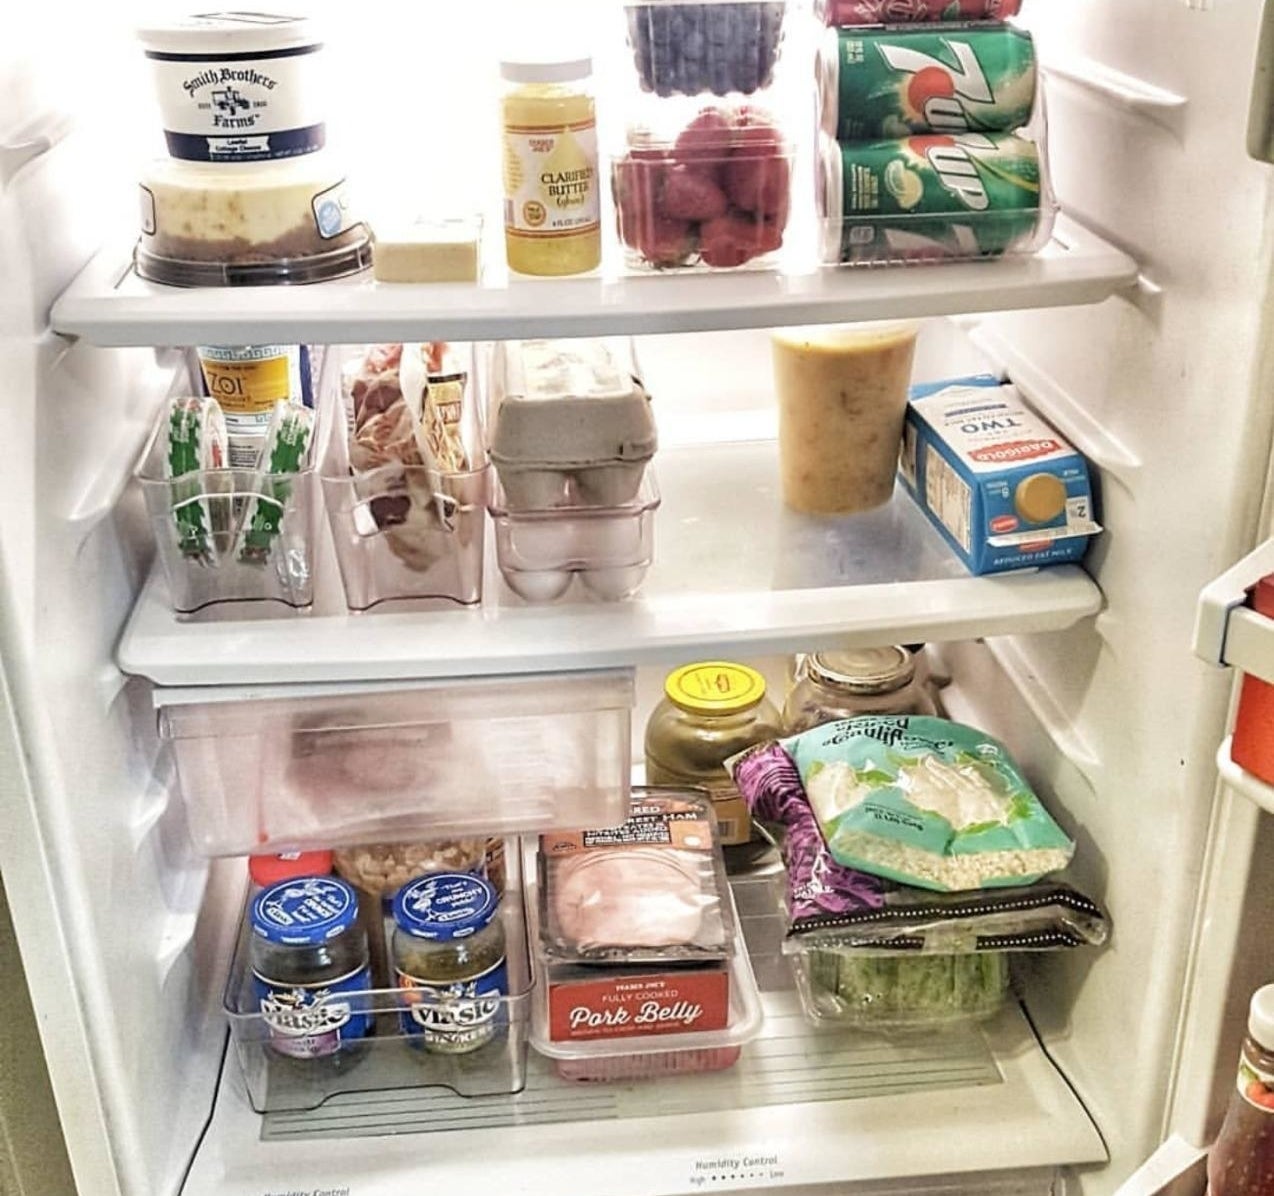 reviewer photo of a refrigerator with its contents neatly organized in clear bins